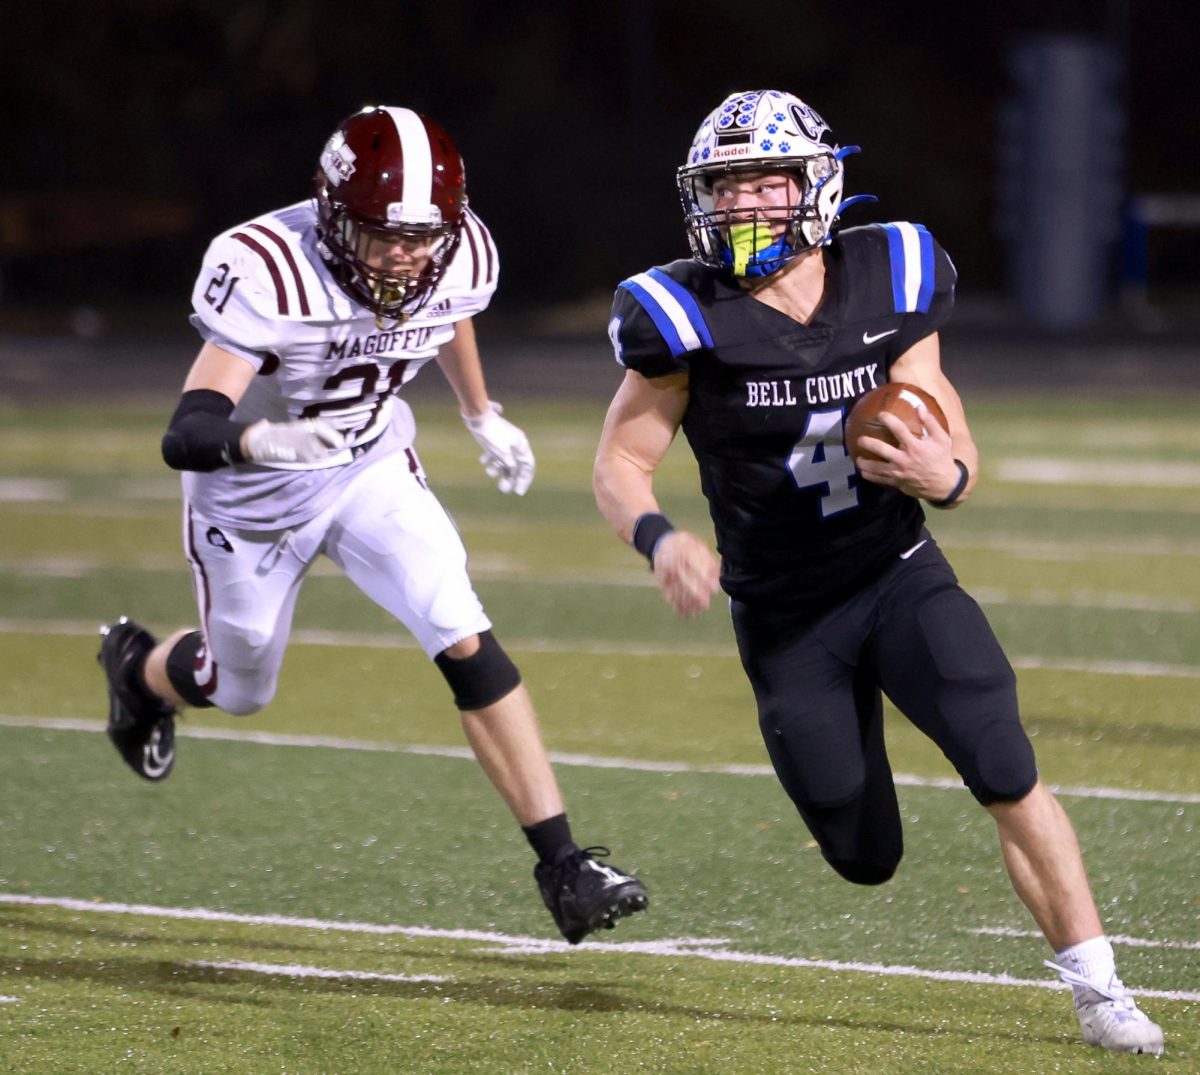 Bell County running Daniel Thomas found room on the outside against Magoffin County in playoff action Friday.